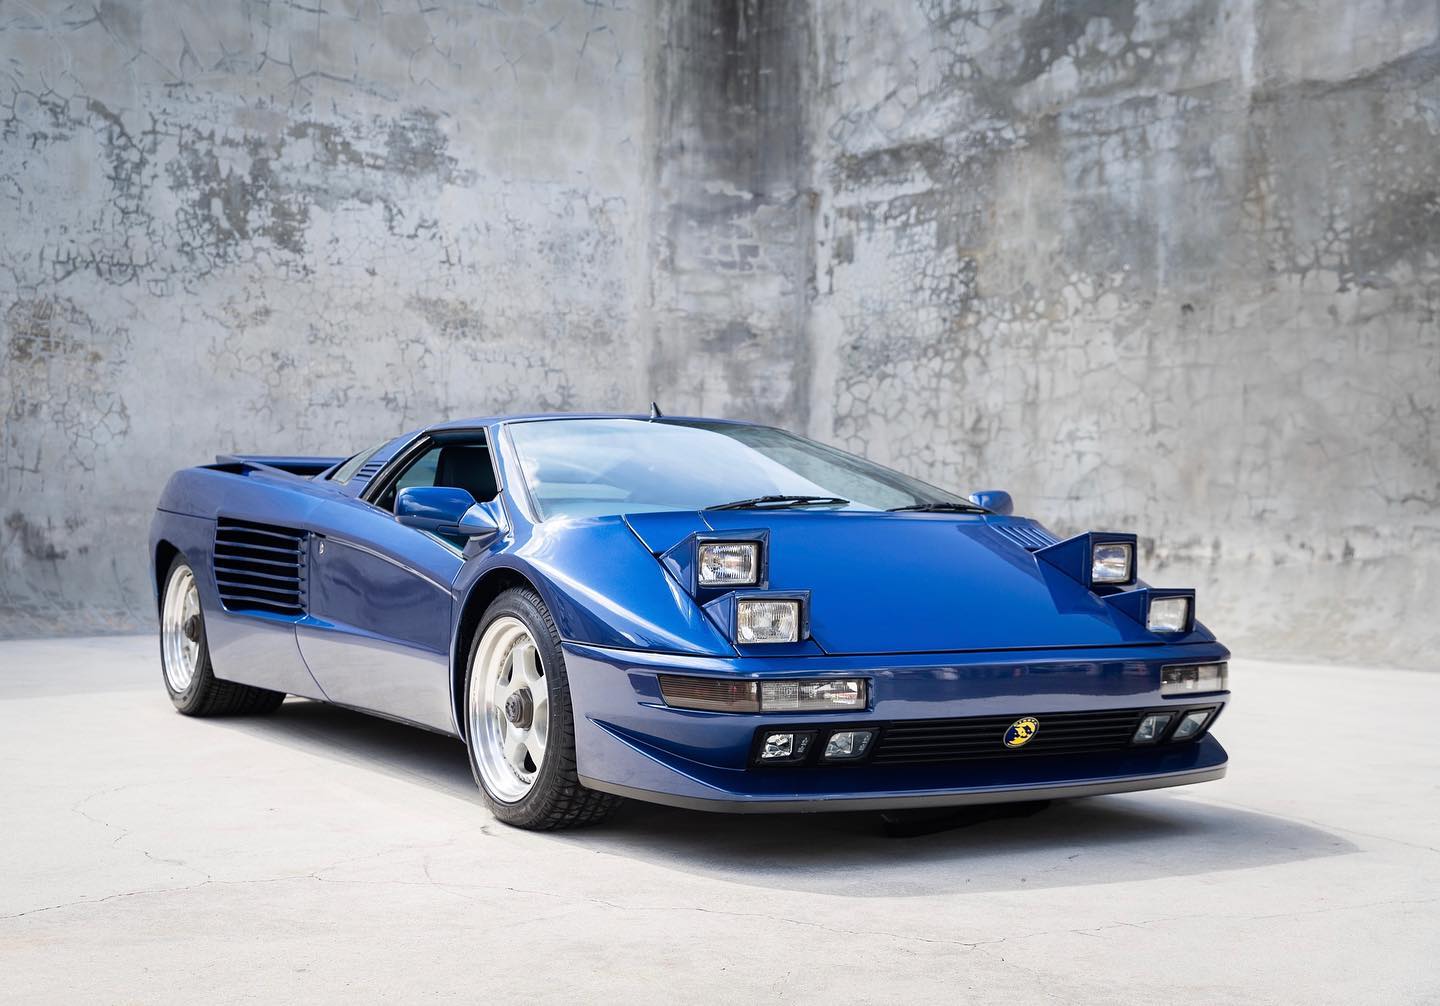 1993 Electric Blue Cizeta v16T - Chassis #101. Stark Concrete Background. Lease an Exotic Car with Premier